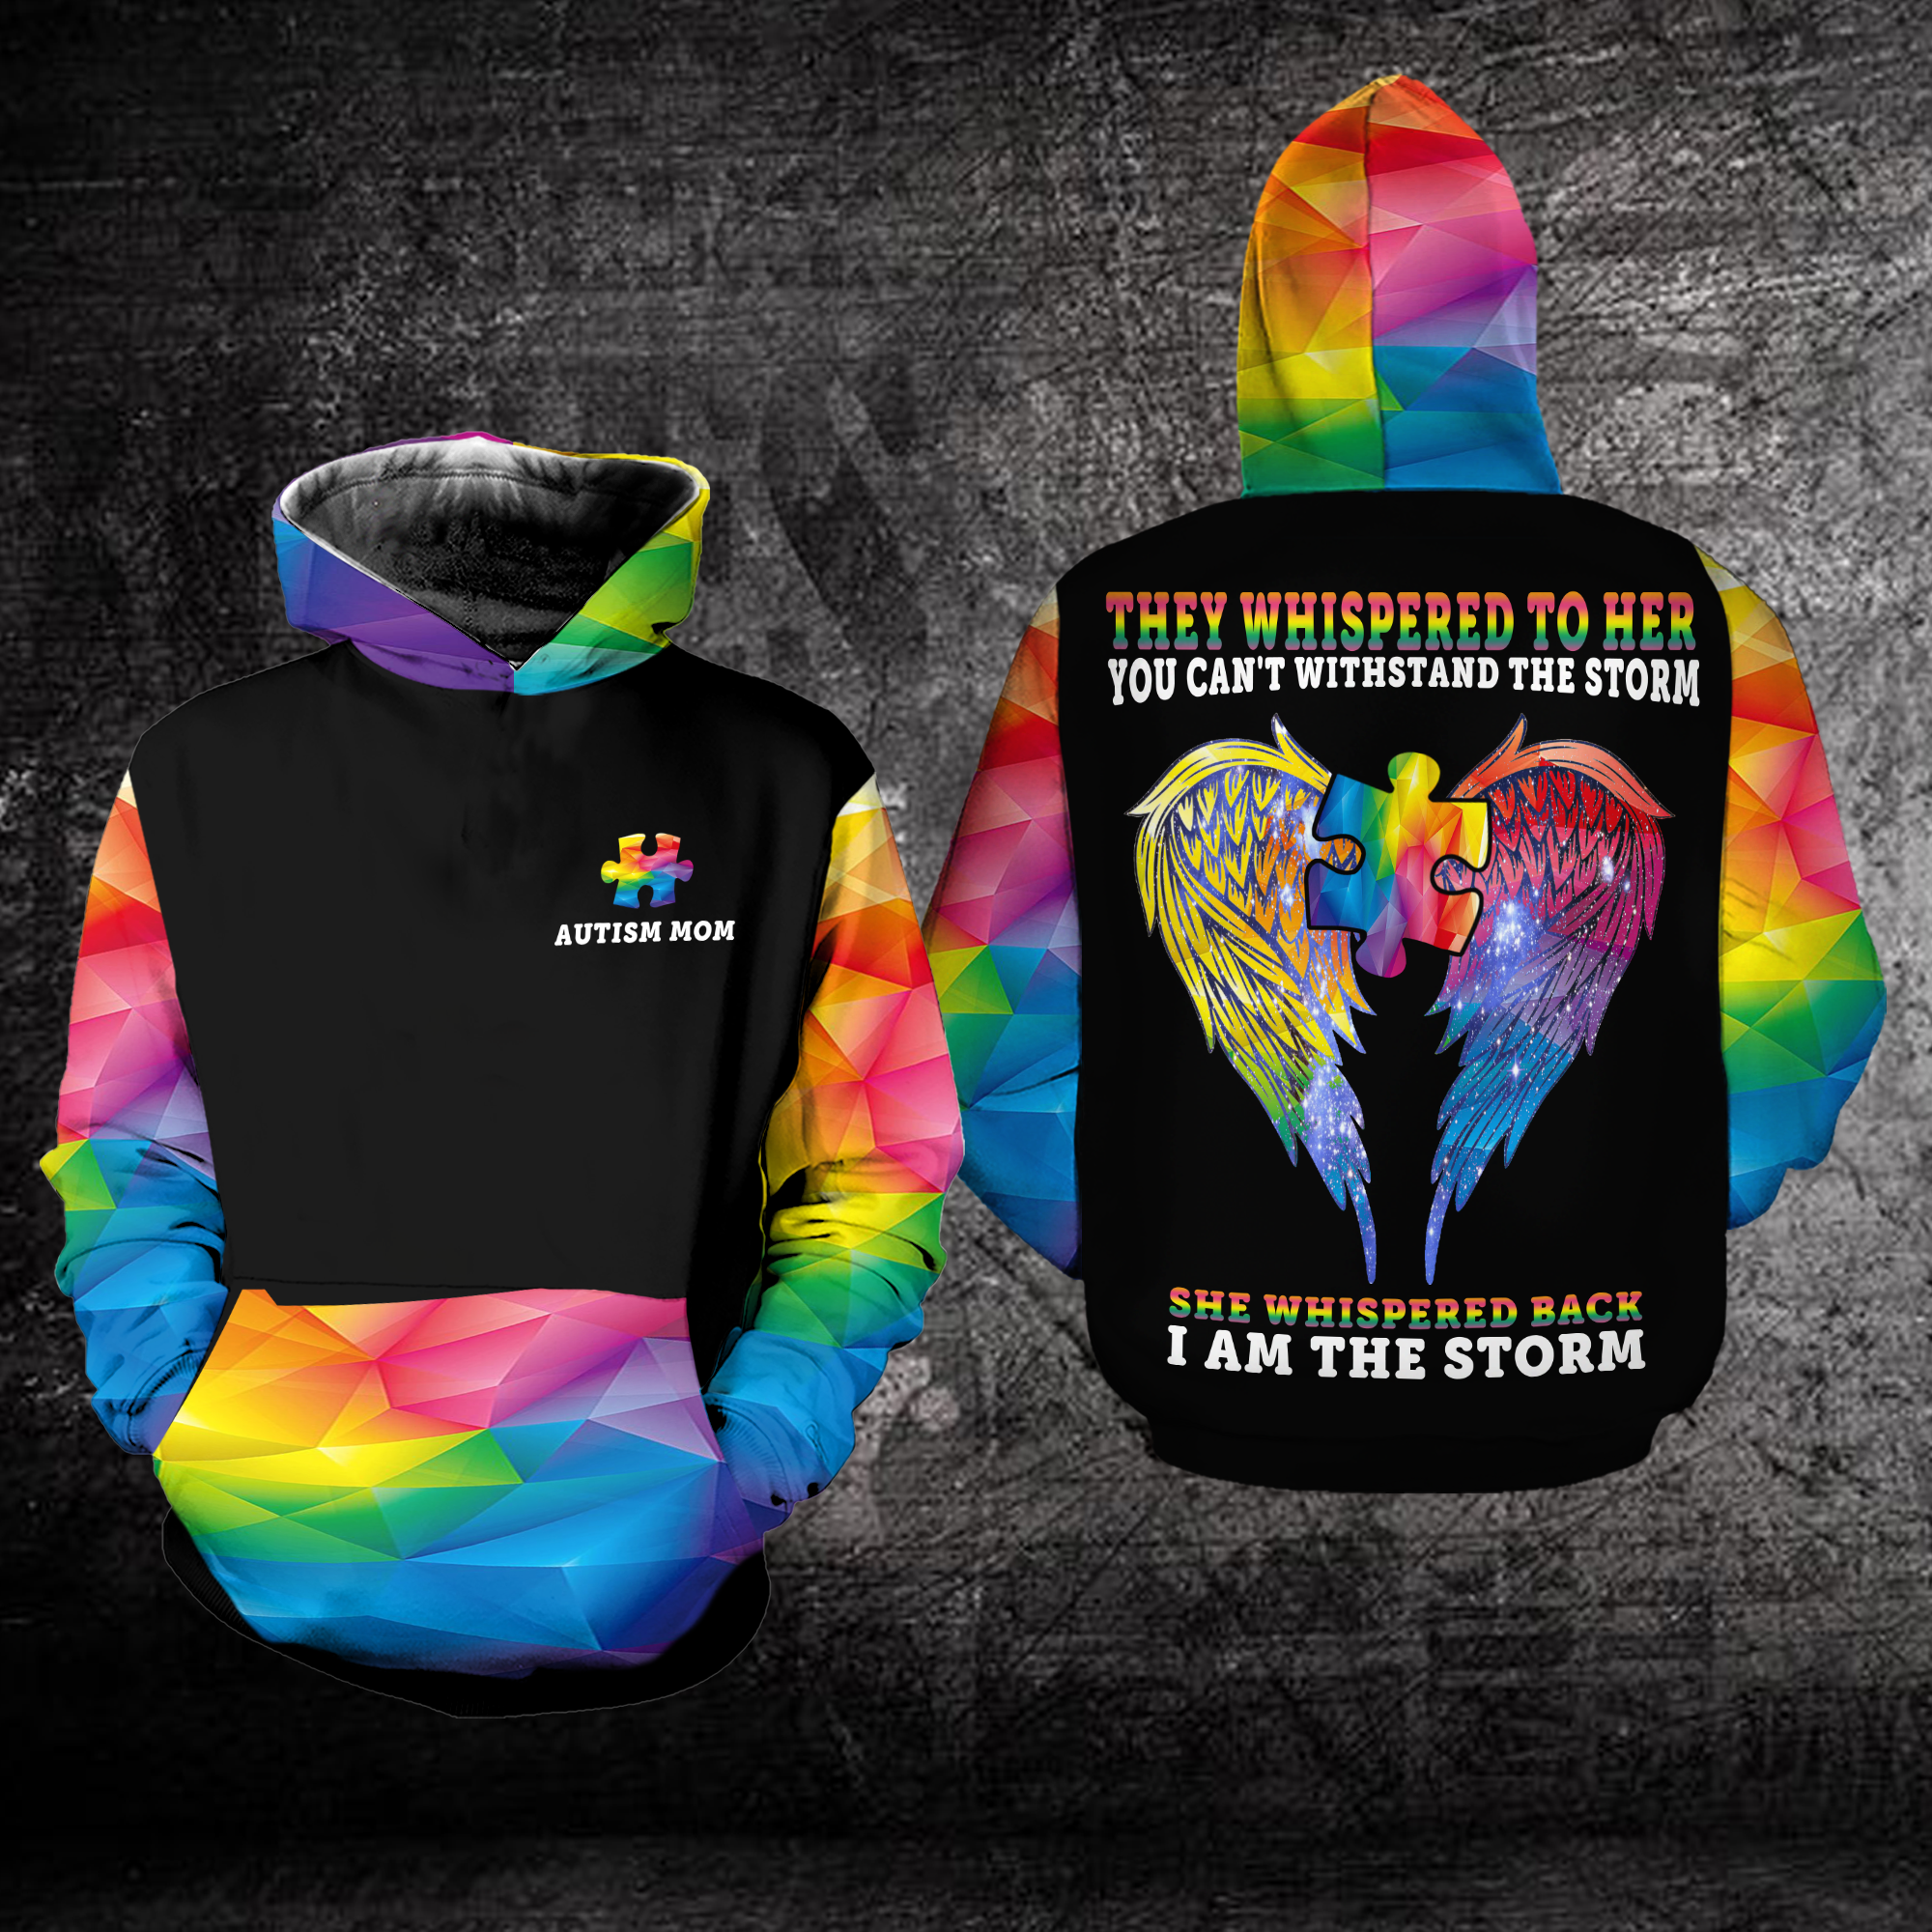 Autism Mom Hoodie : They whispered to her you cannot withstand the storm